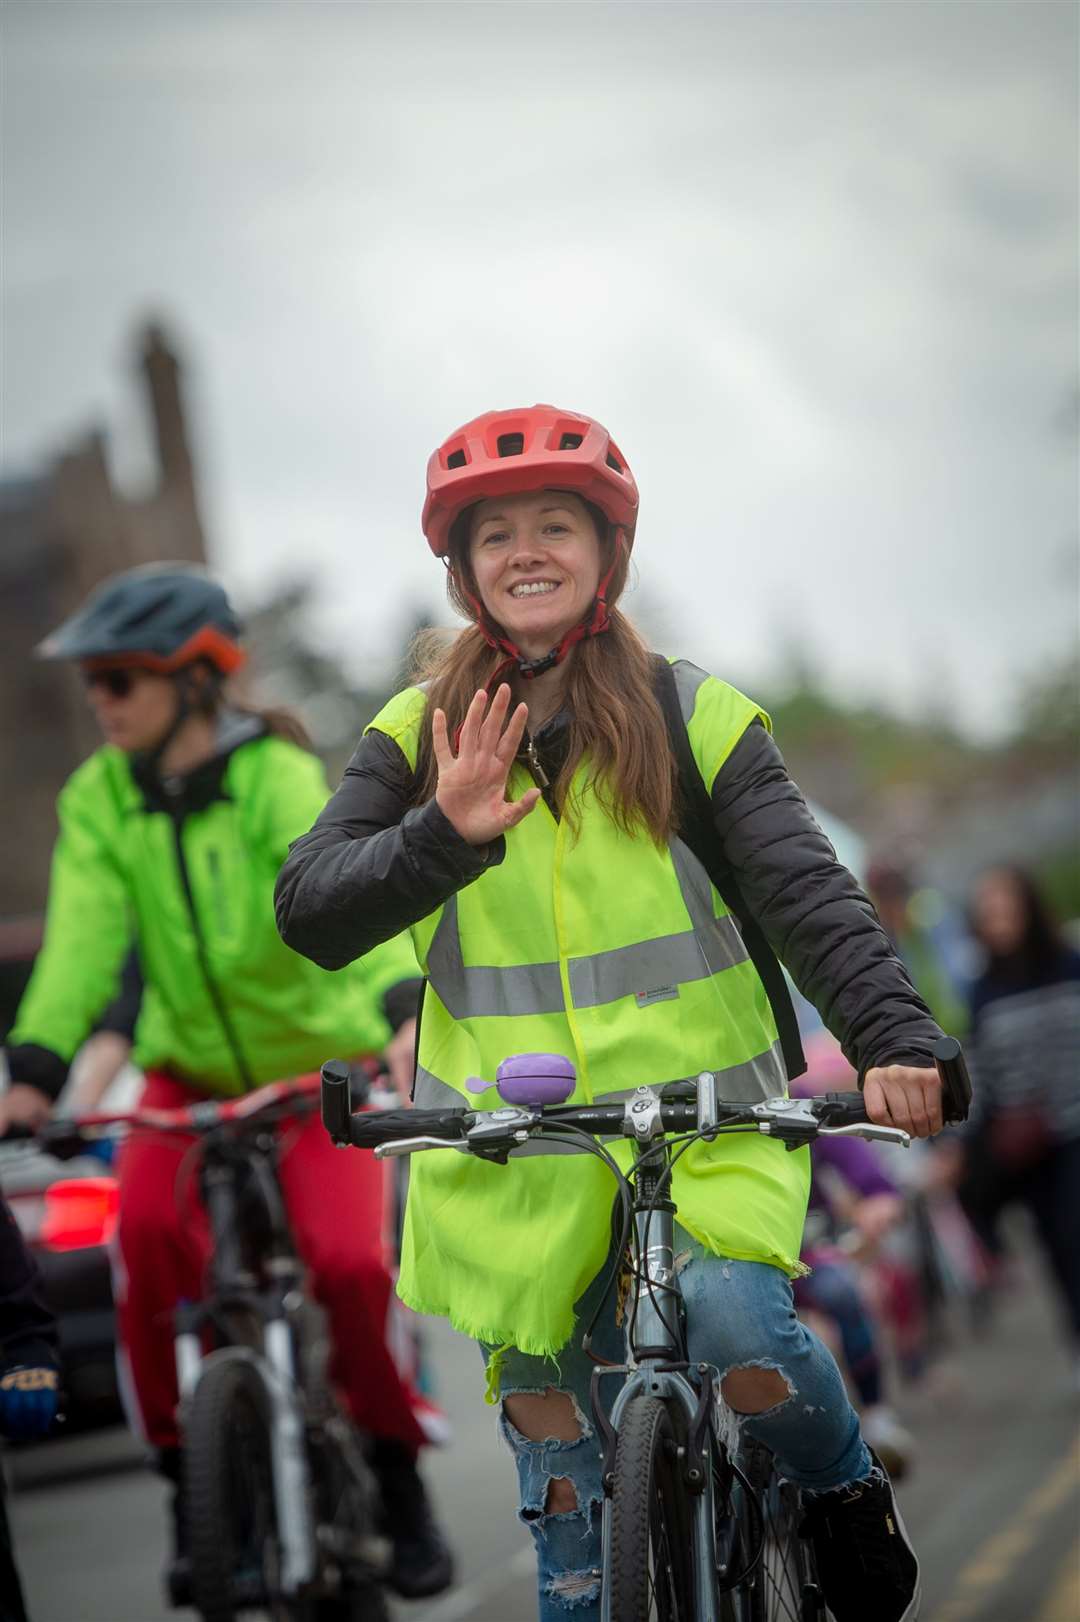 Kidical Mass ride which is a monthly event to highlight and promote the benefits of cycling.